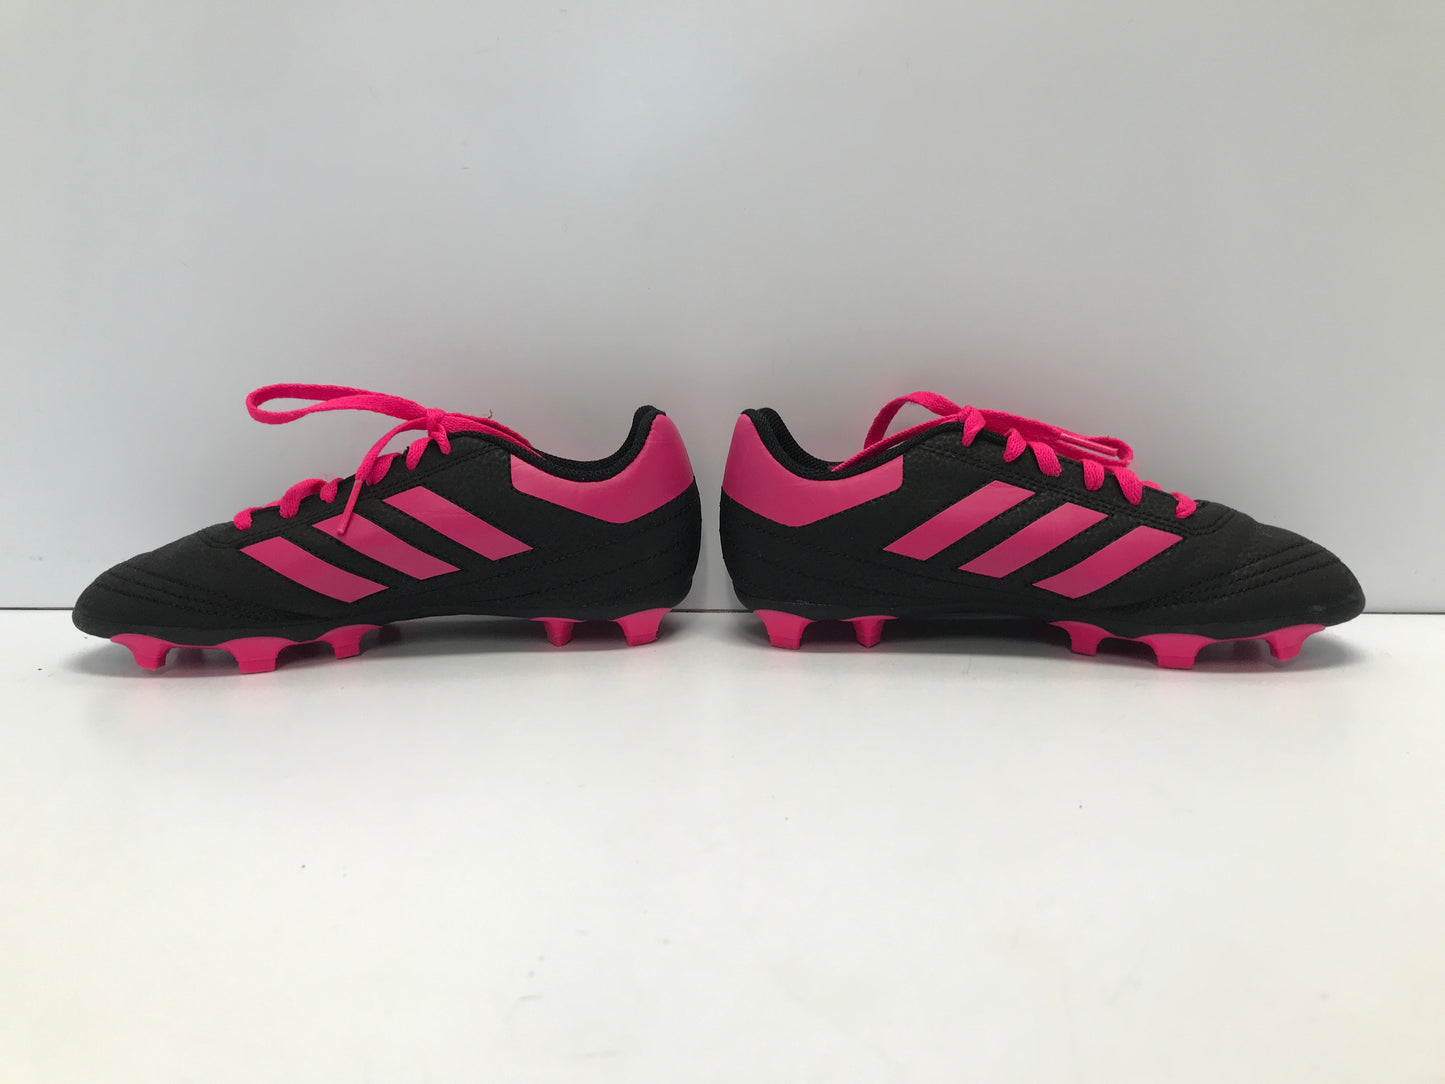 Soccer Shoes Cleats Child 2.5 Adidas Black Pink Minor Wear